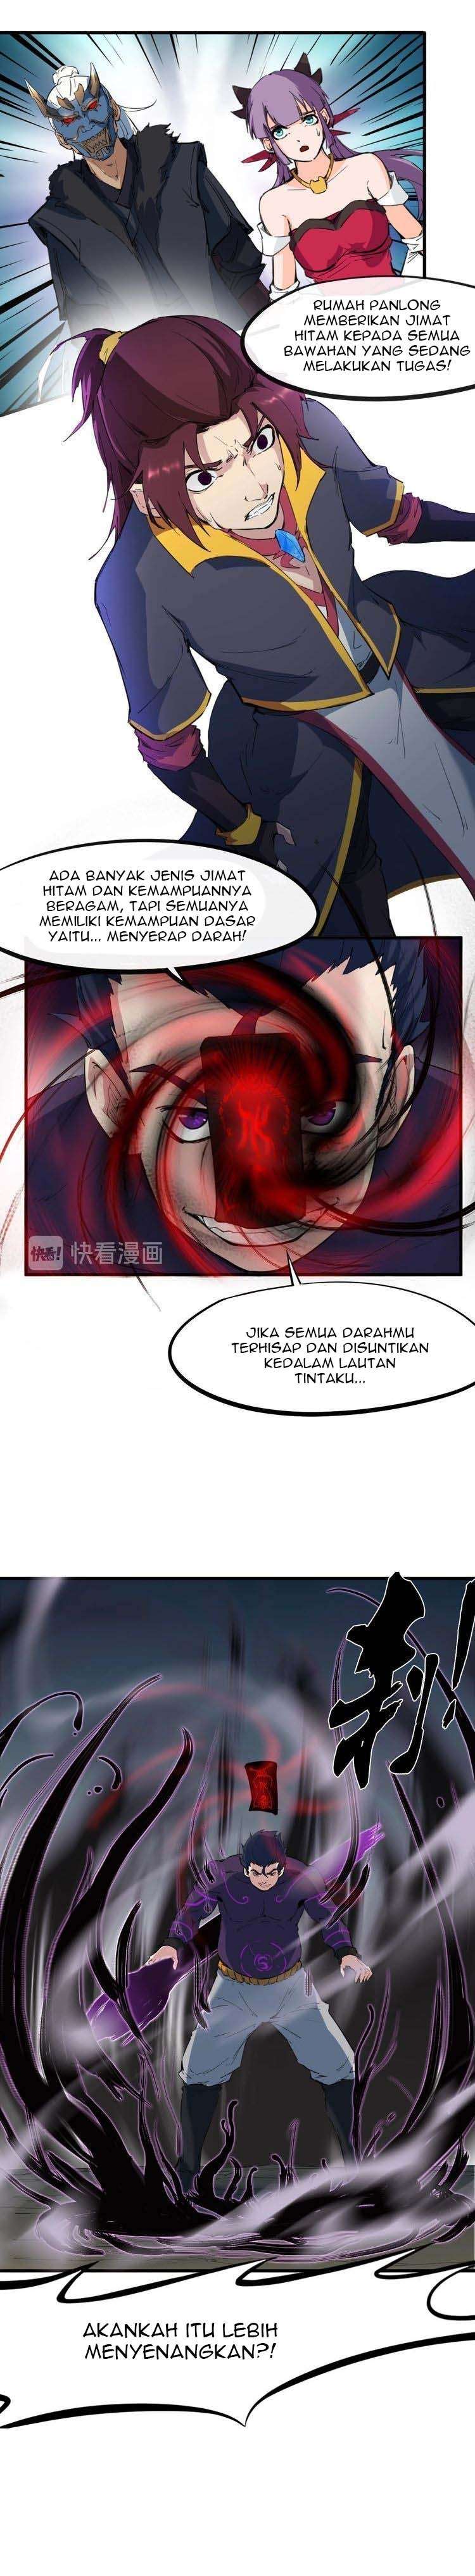 Dragon’s Blood Vessels Chapter 46 5